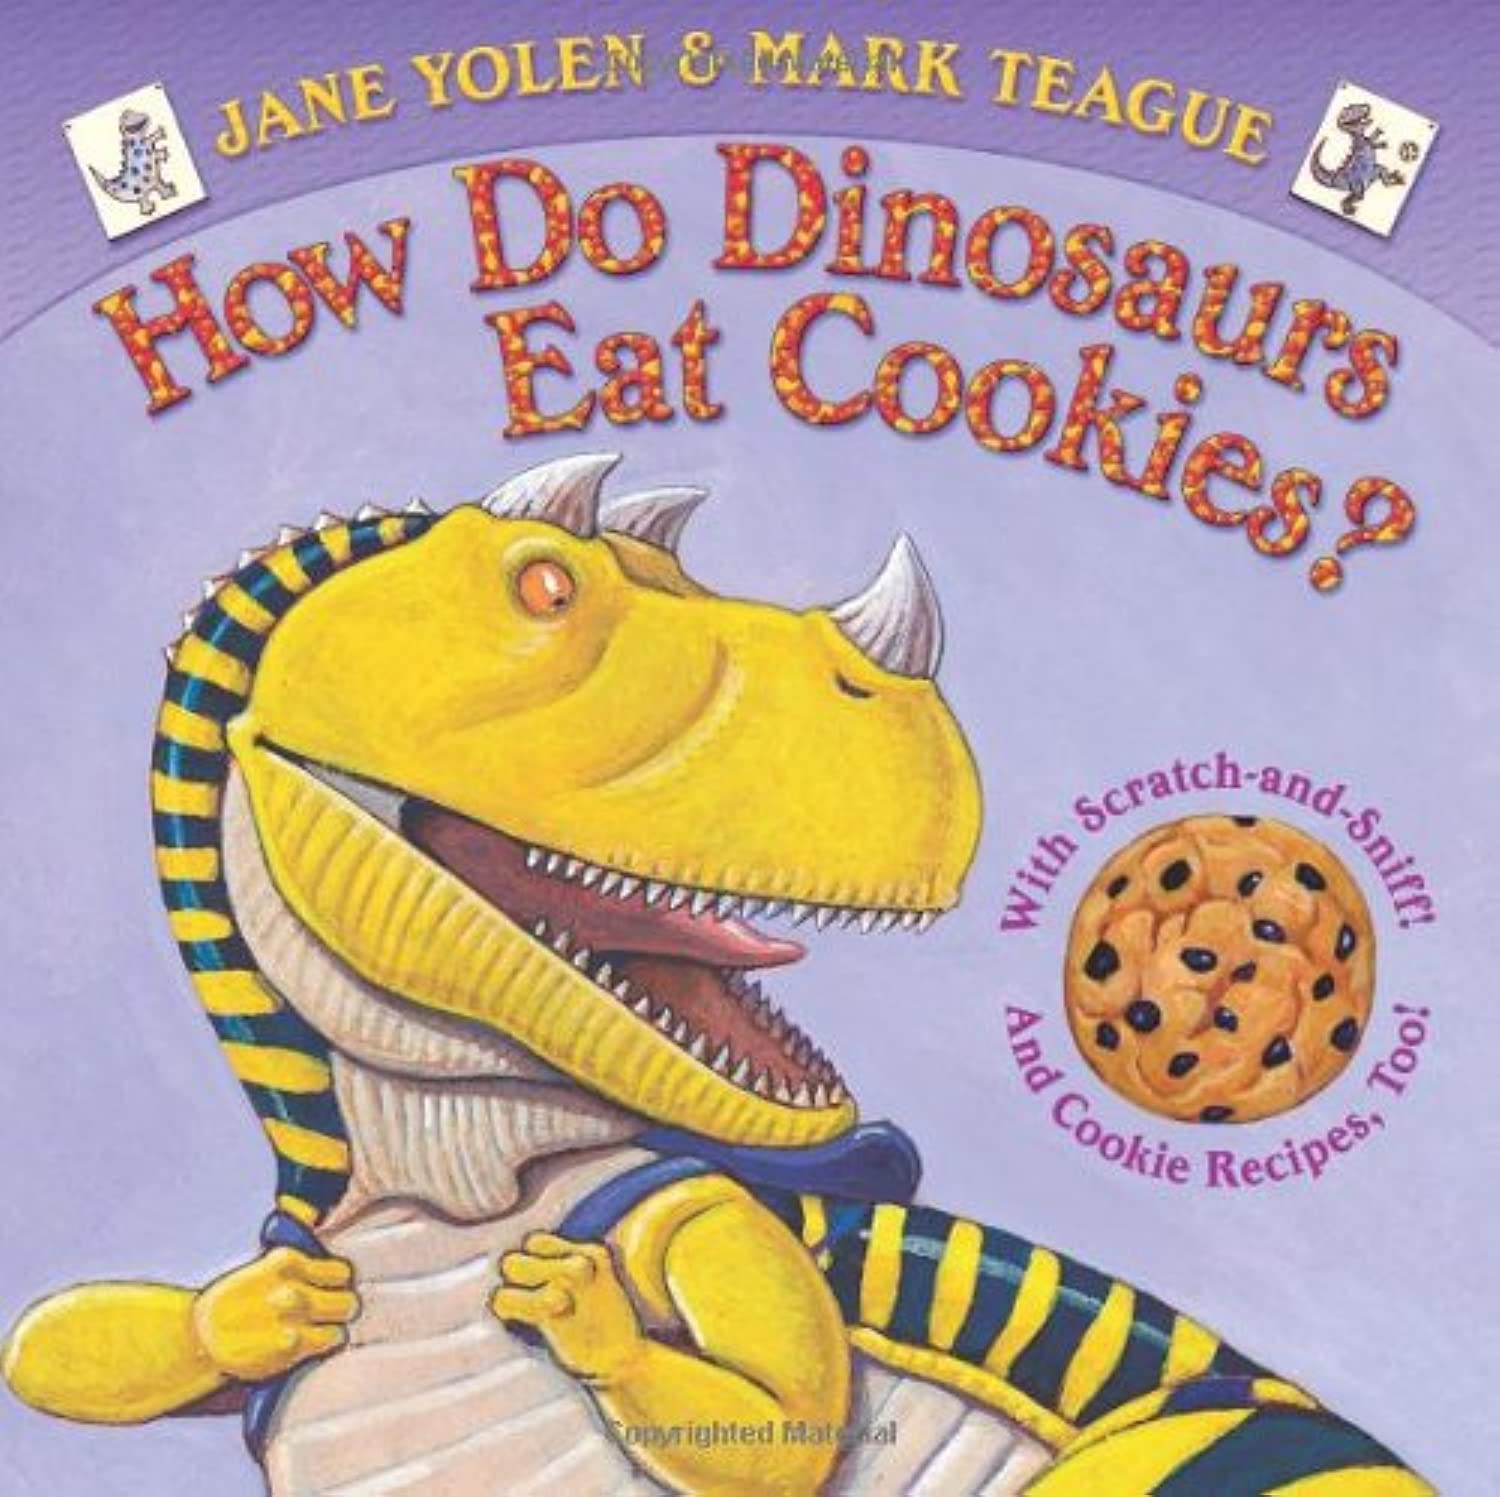 Image for "How Do Dinosaurs Eat Cookies?"